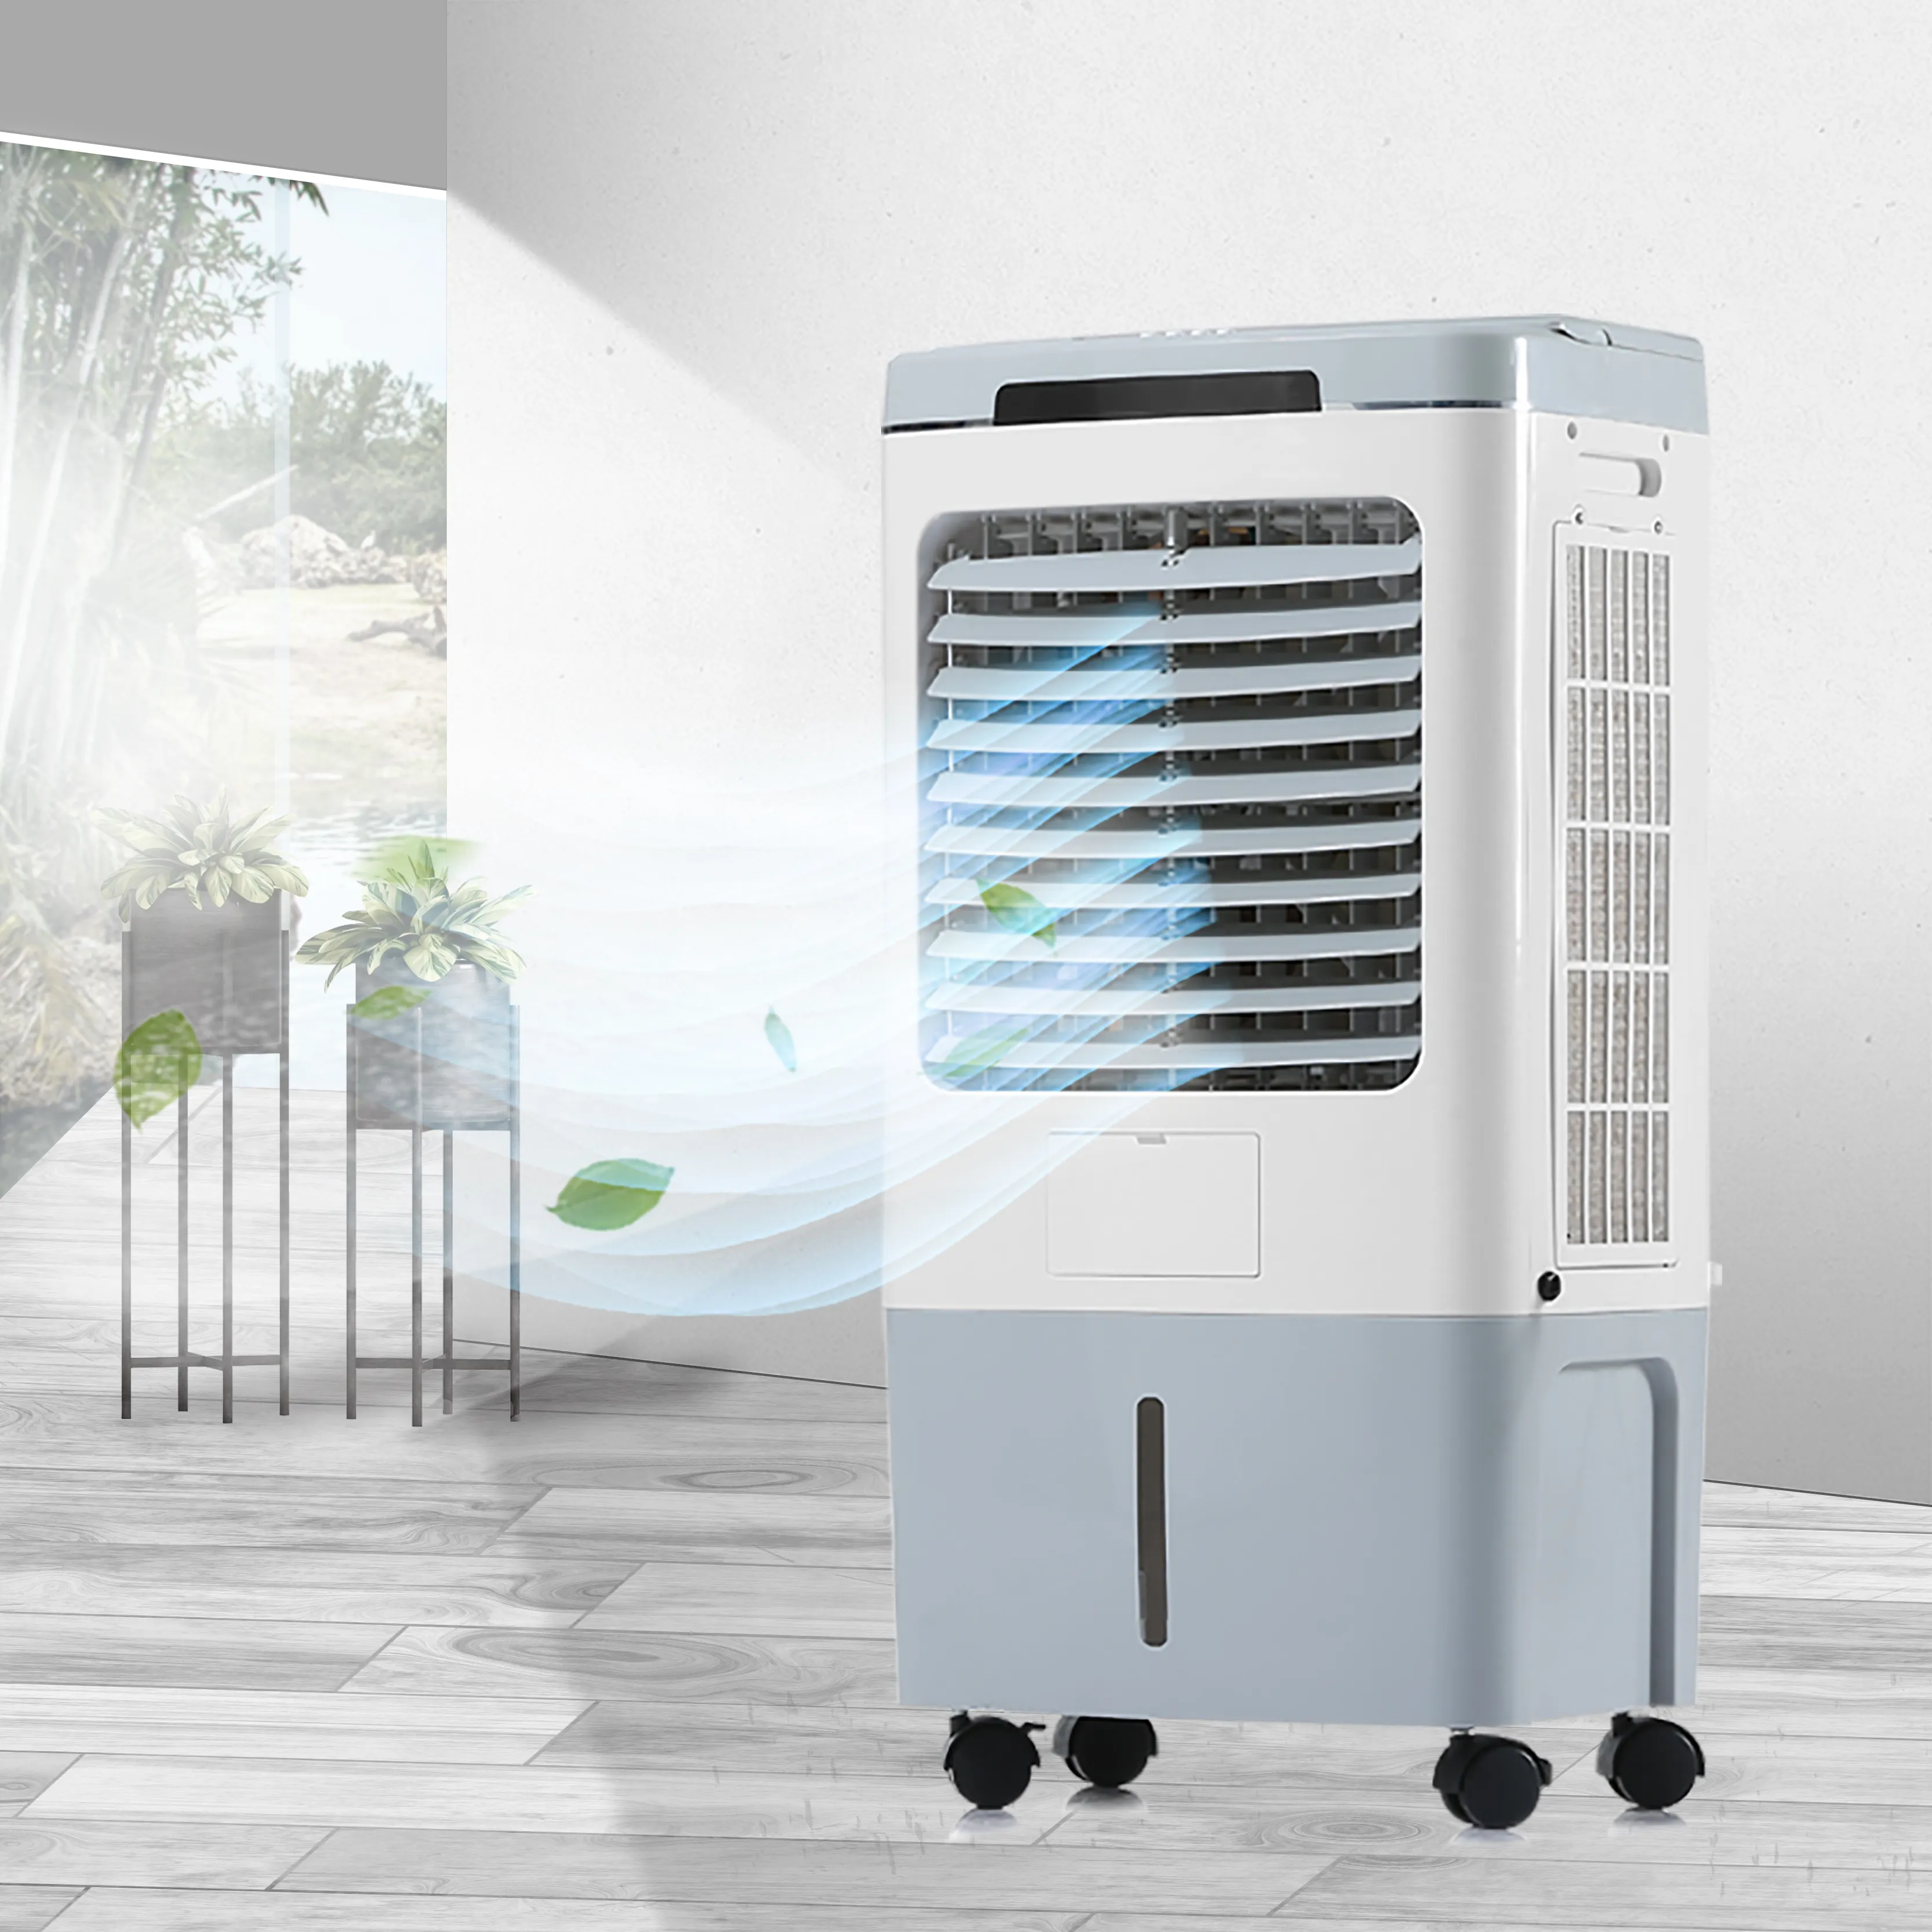 Factory Price Mini Portable Rechargeable Air Cooler Conditioner Industrial Evaporative Stand Air Cooler Fan